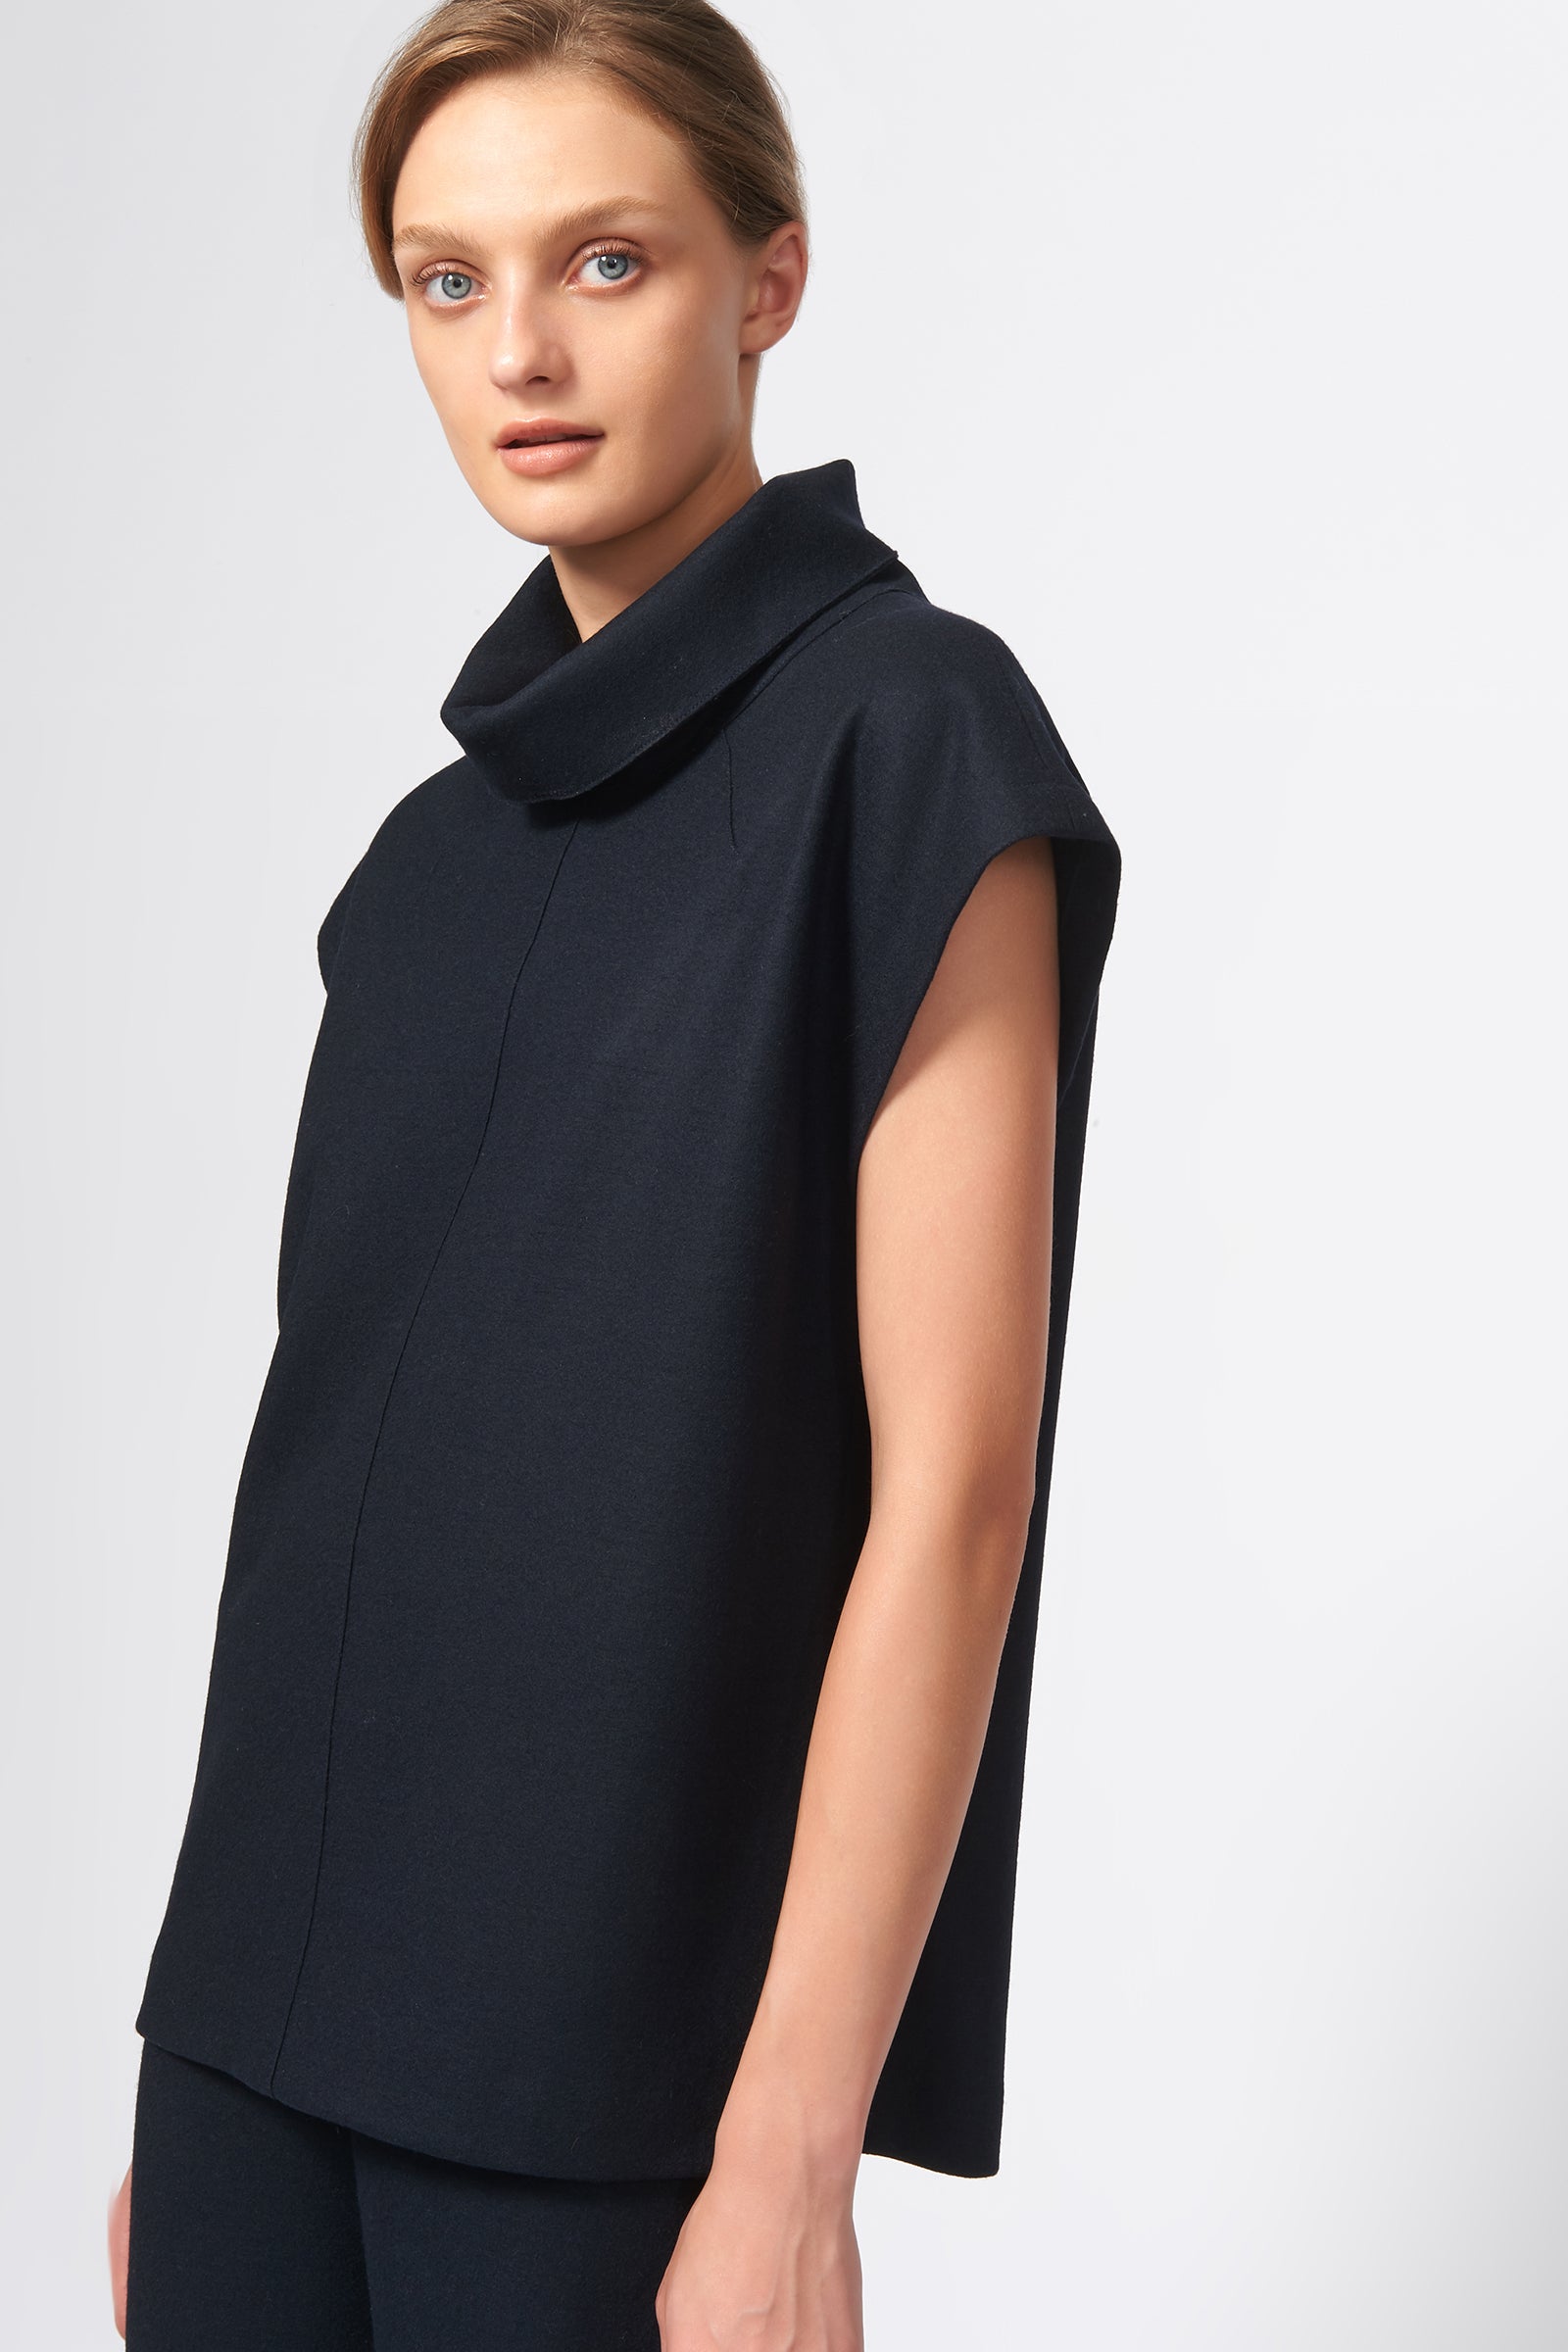 Seamed Cap Sleeve Turtleneck in Midnight Navy Made From 100% Japanese ...